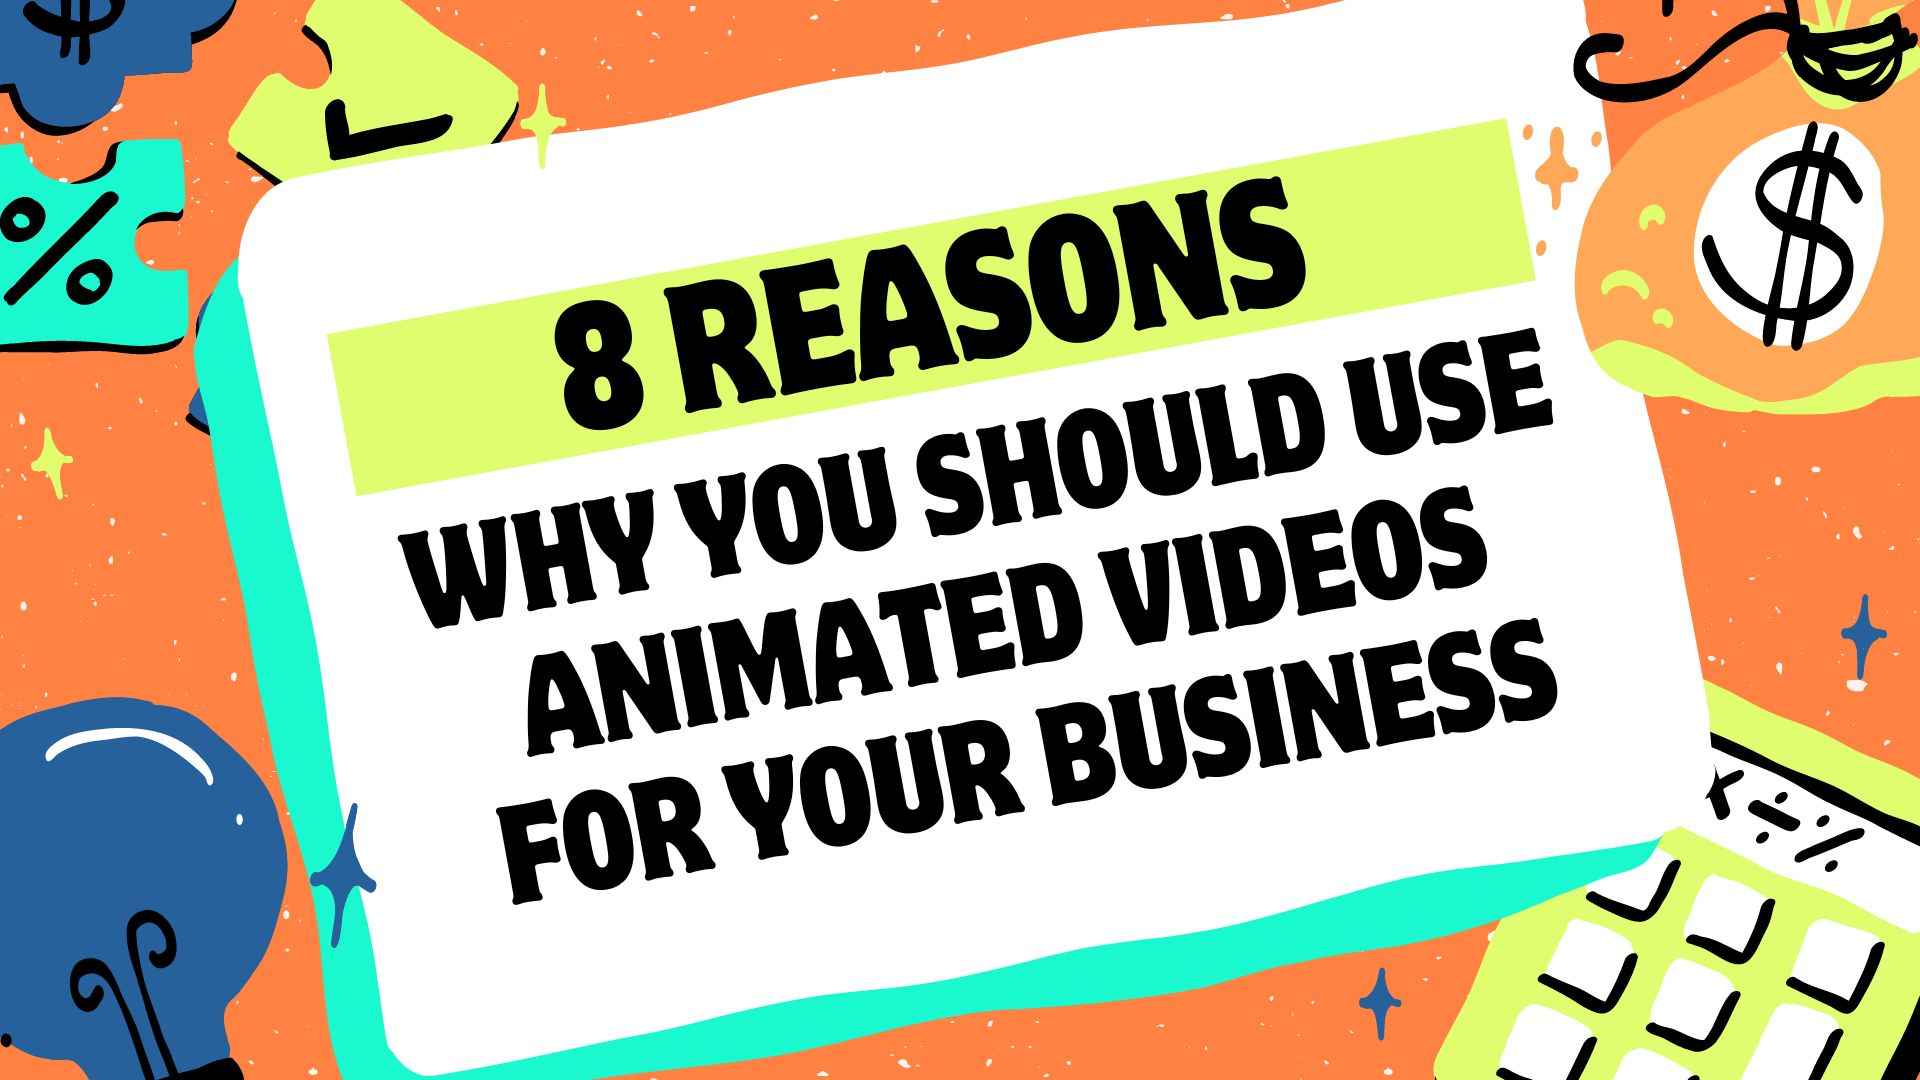 animated videos for your business